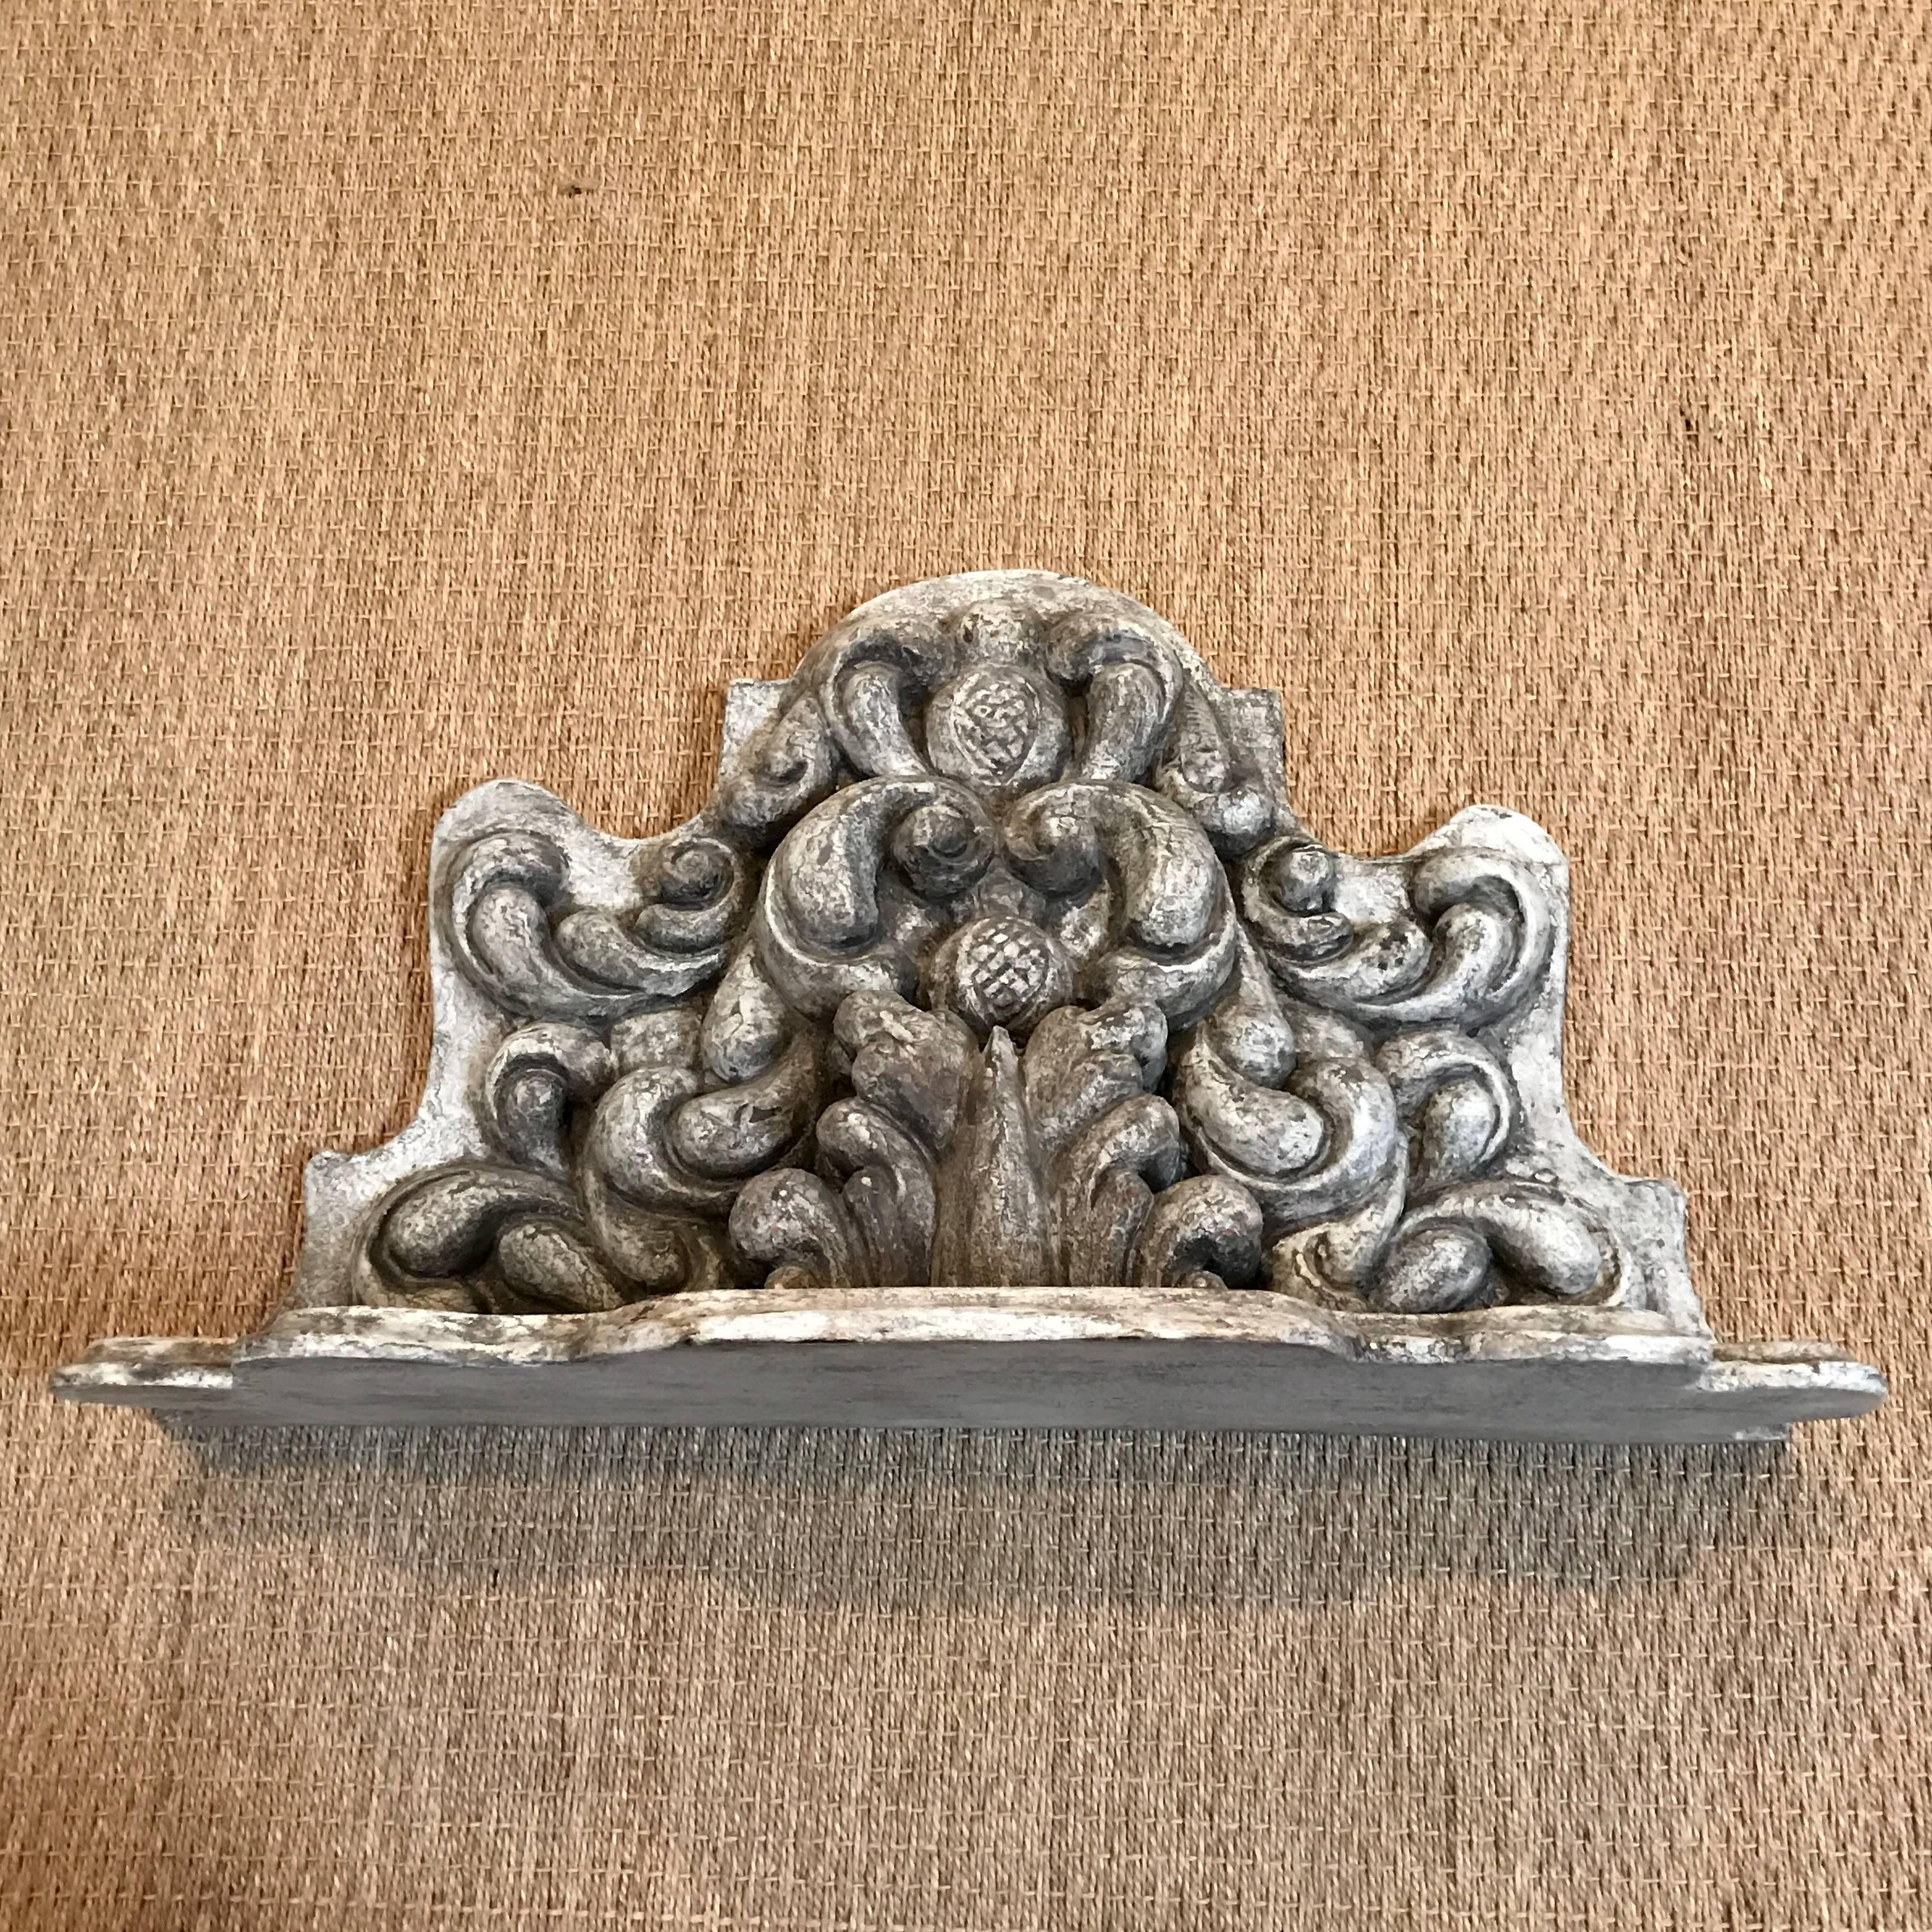 Wall bracket with ornately carved details
Finish is antique white and glazed.